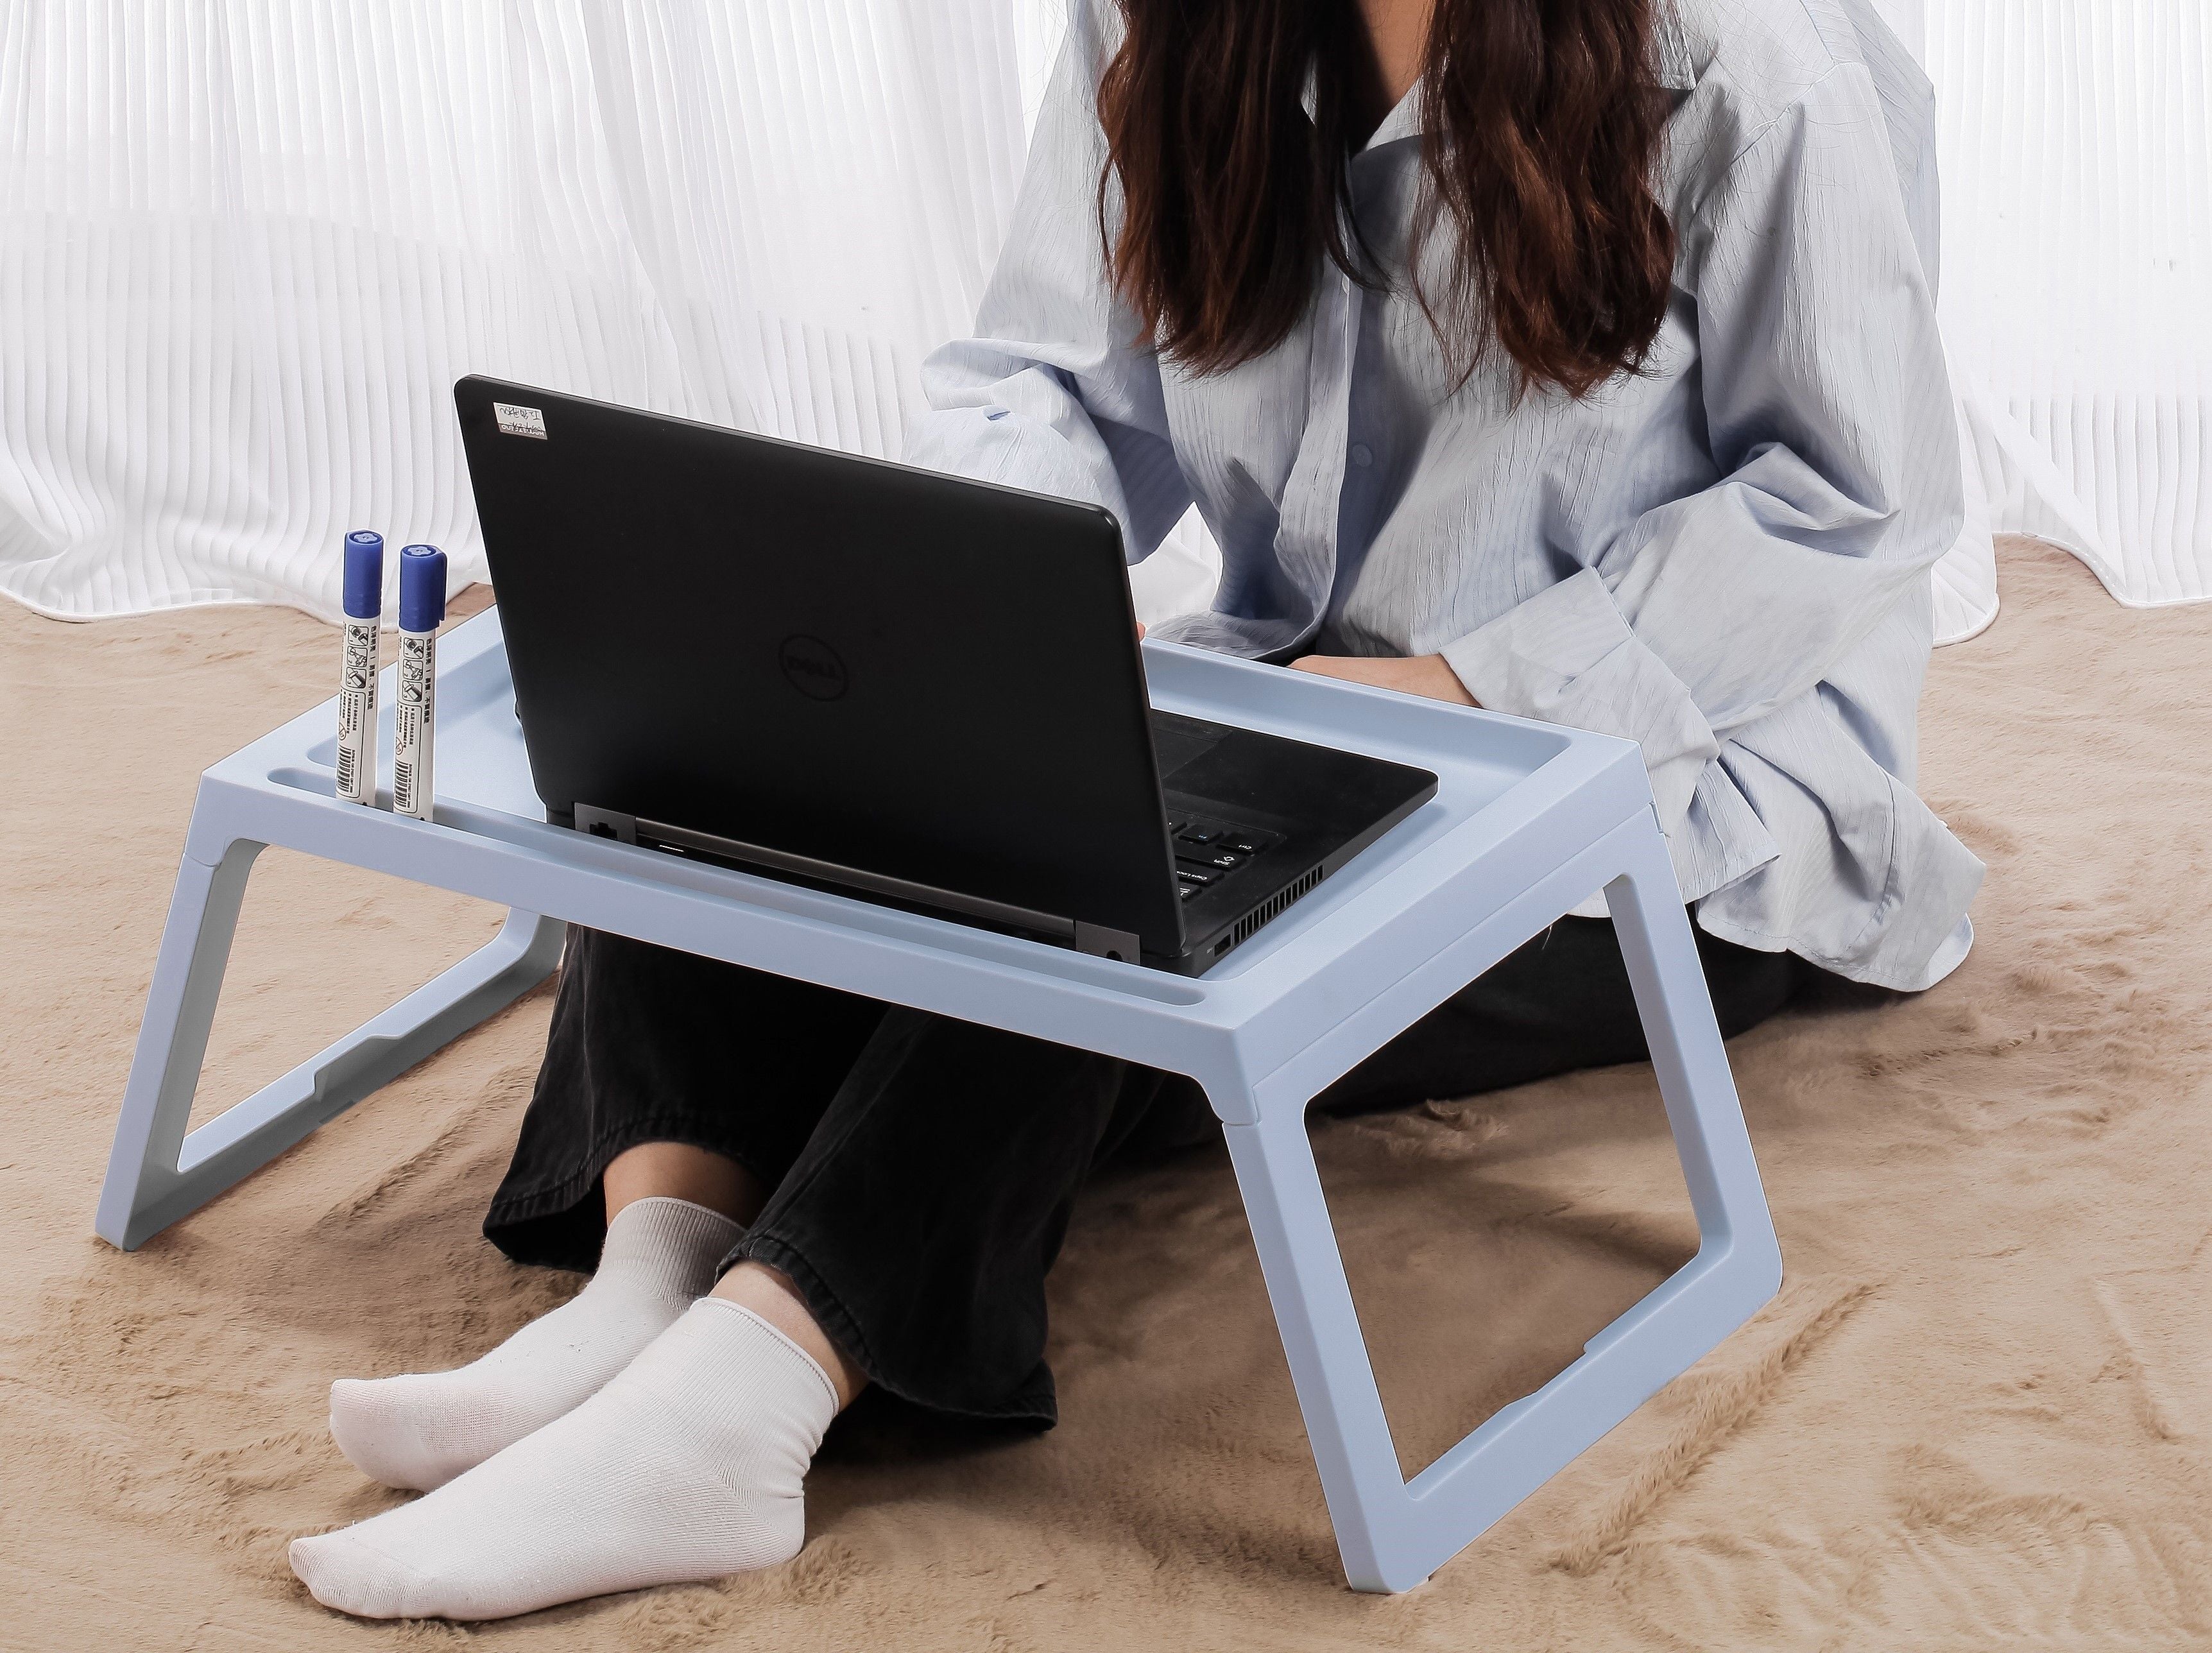 Free Shipping! Multifunction Laptop Bed Desk with foldable legs for Home Office (Blue)